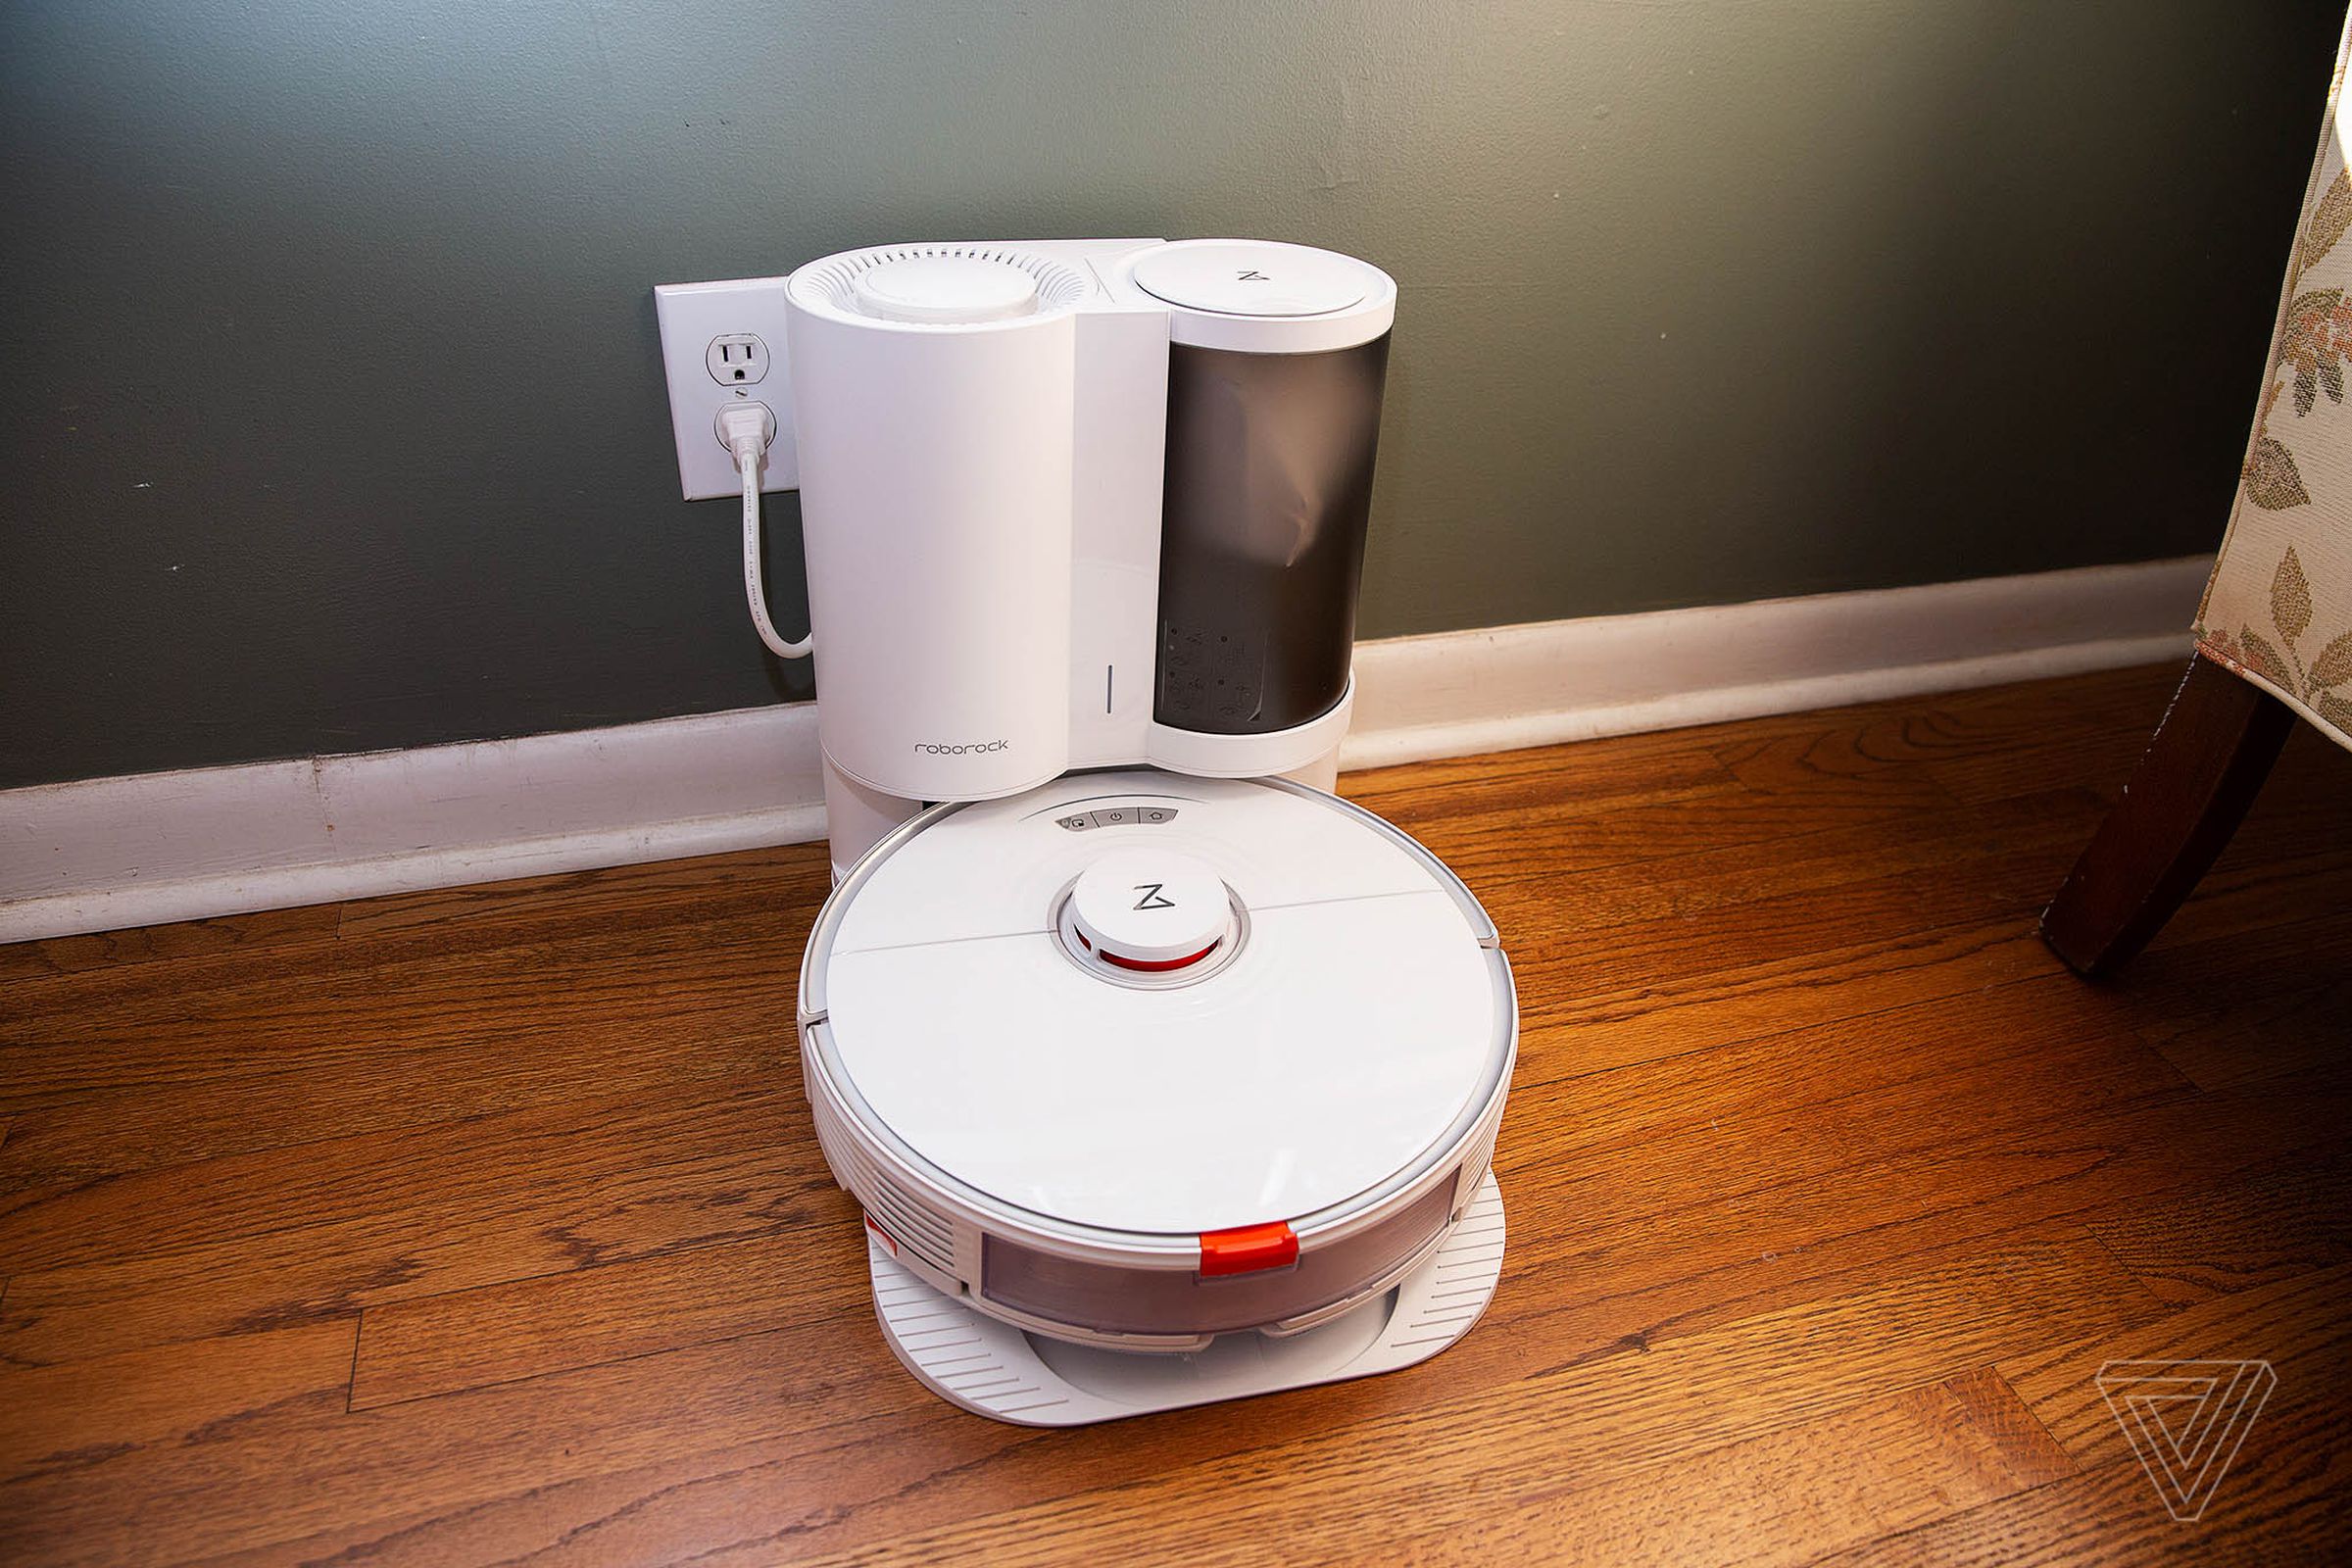 The Roborock S7 Plus combines the robot vac with an auto-empty dock.